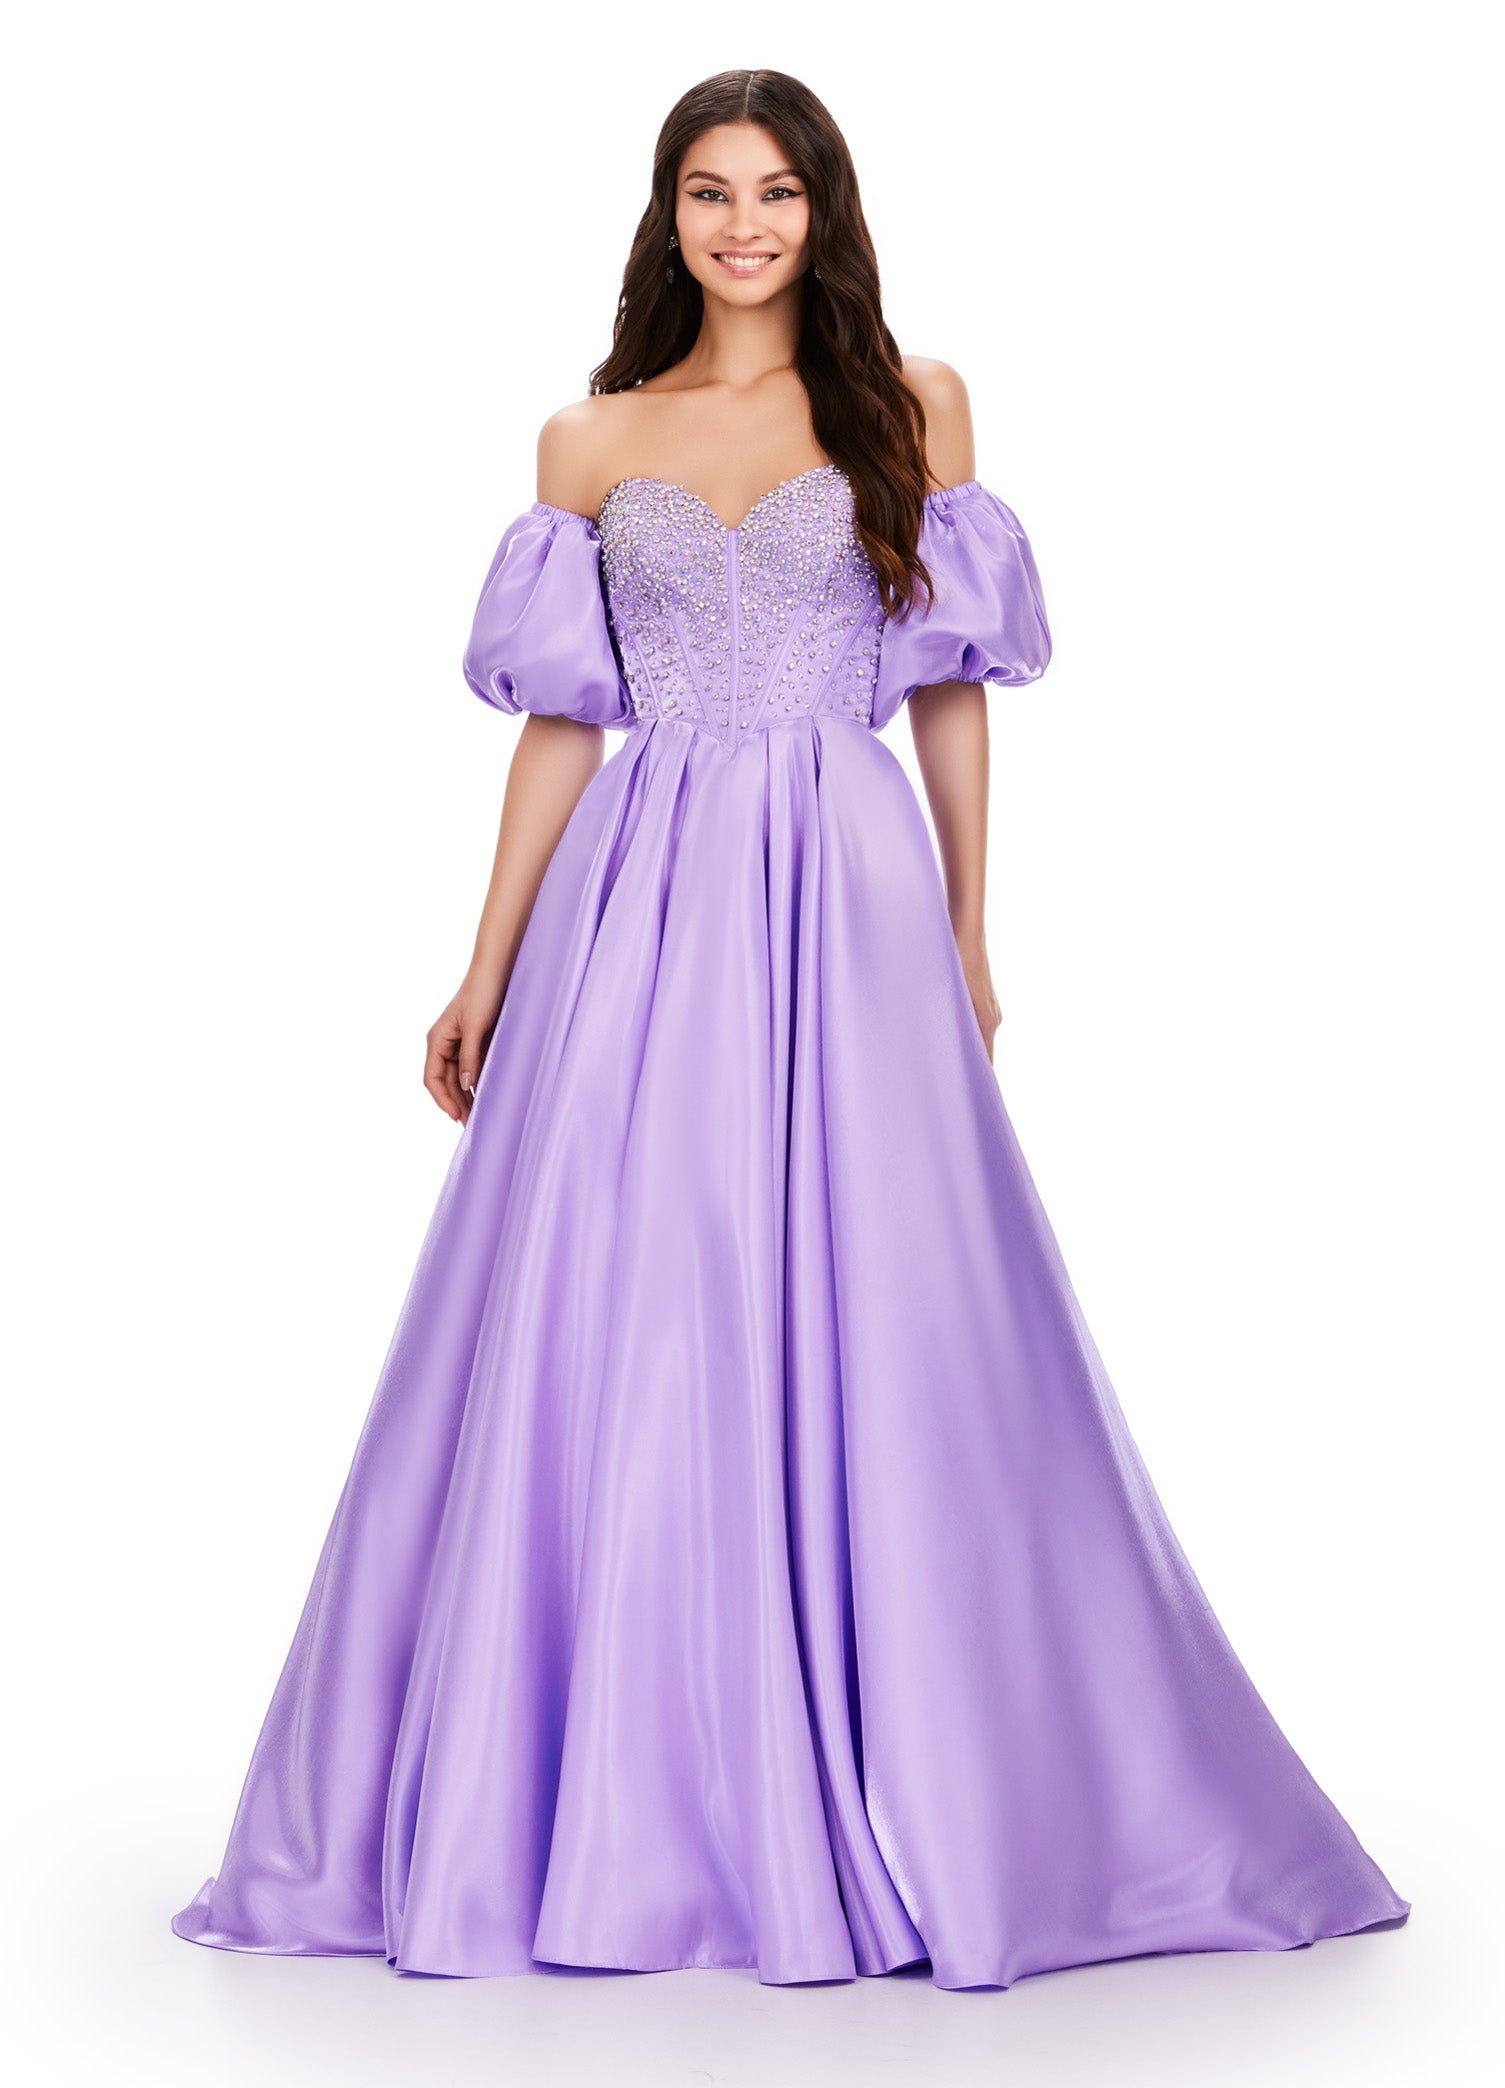 Elevate your formalwear with the Ashley Lauren 11642 prom dress. The luxurious satin fabric, sweetheart neckline, and crystal corset add elegance and charm to this A-line ballgown. The puff sleeves bring a touch of drama and playfulness to your look. Perfect for prom or pageants. A satin ball gown fit for a queen. This strapless dress features a beaded corset bodice with detachable puff sleeves and a lace up back.